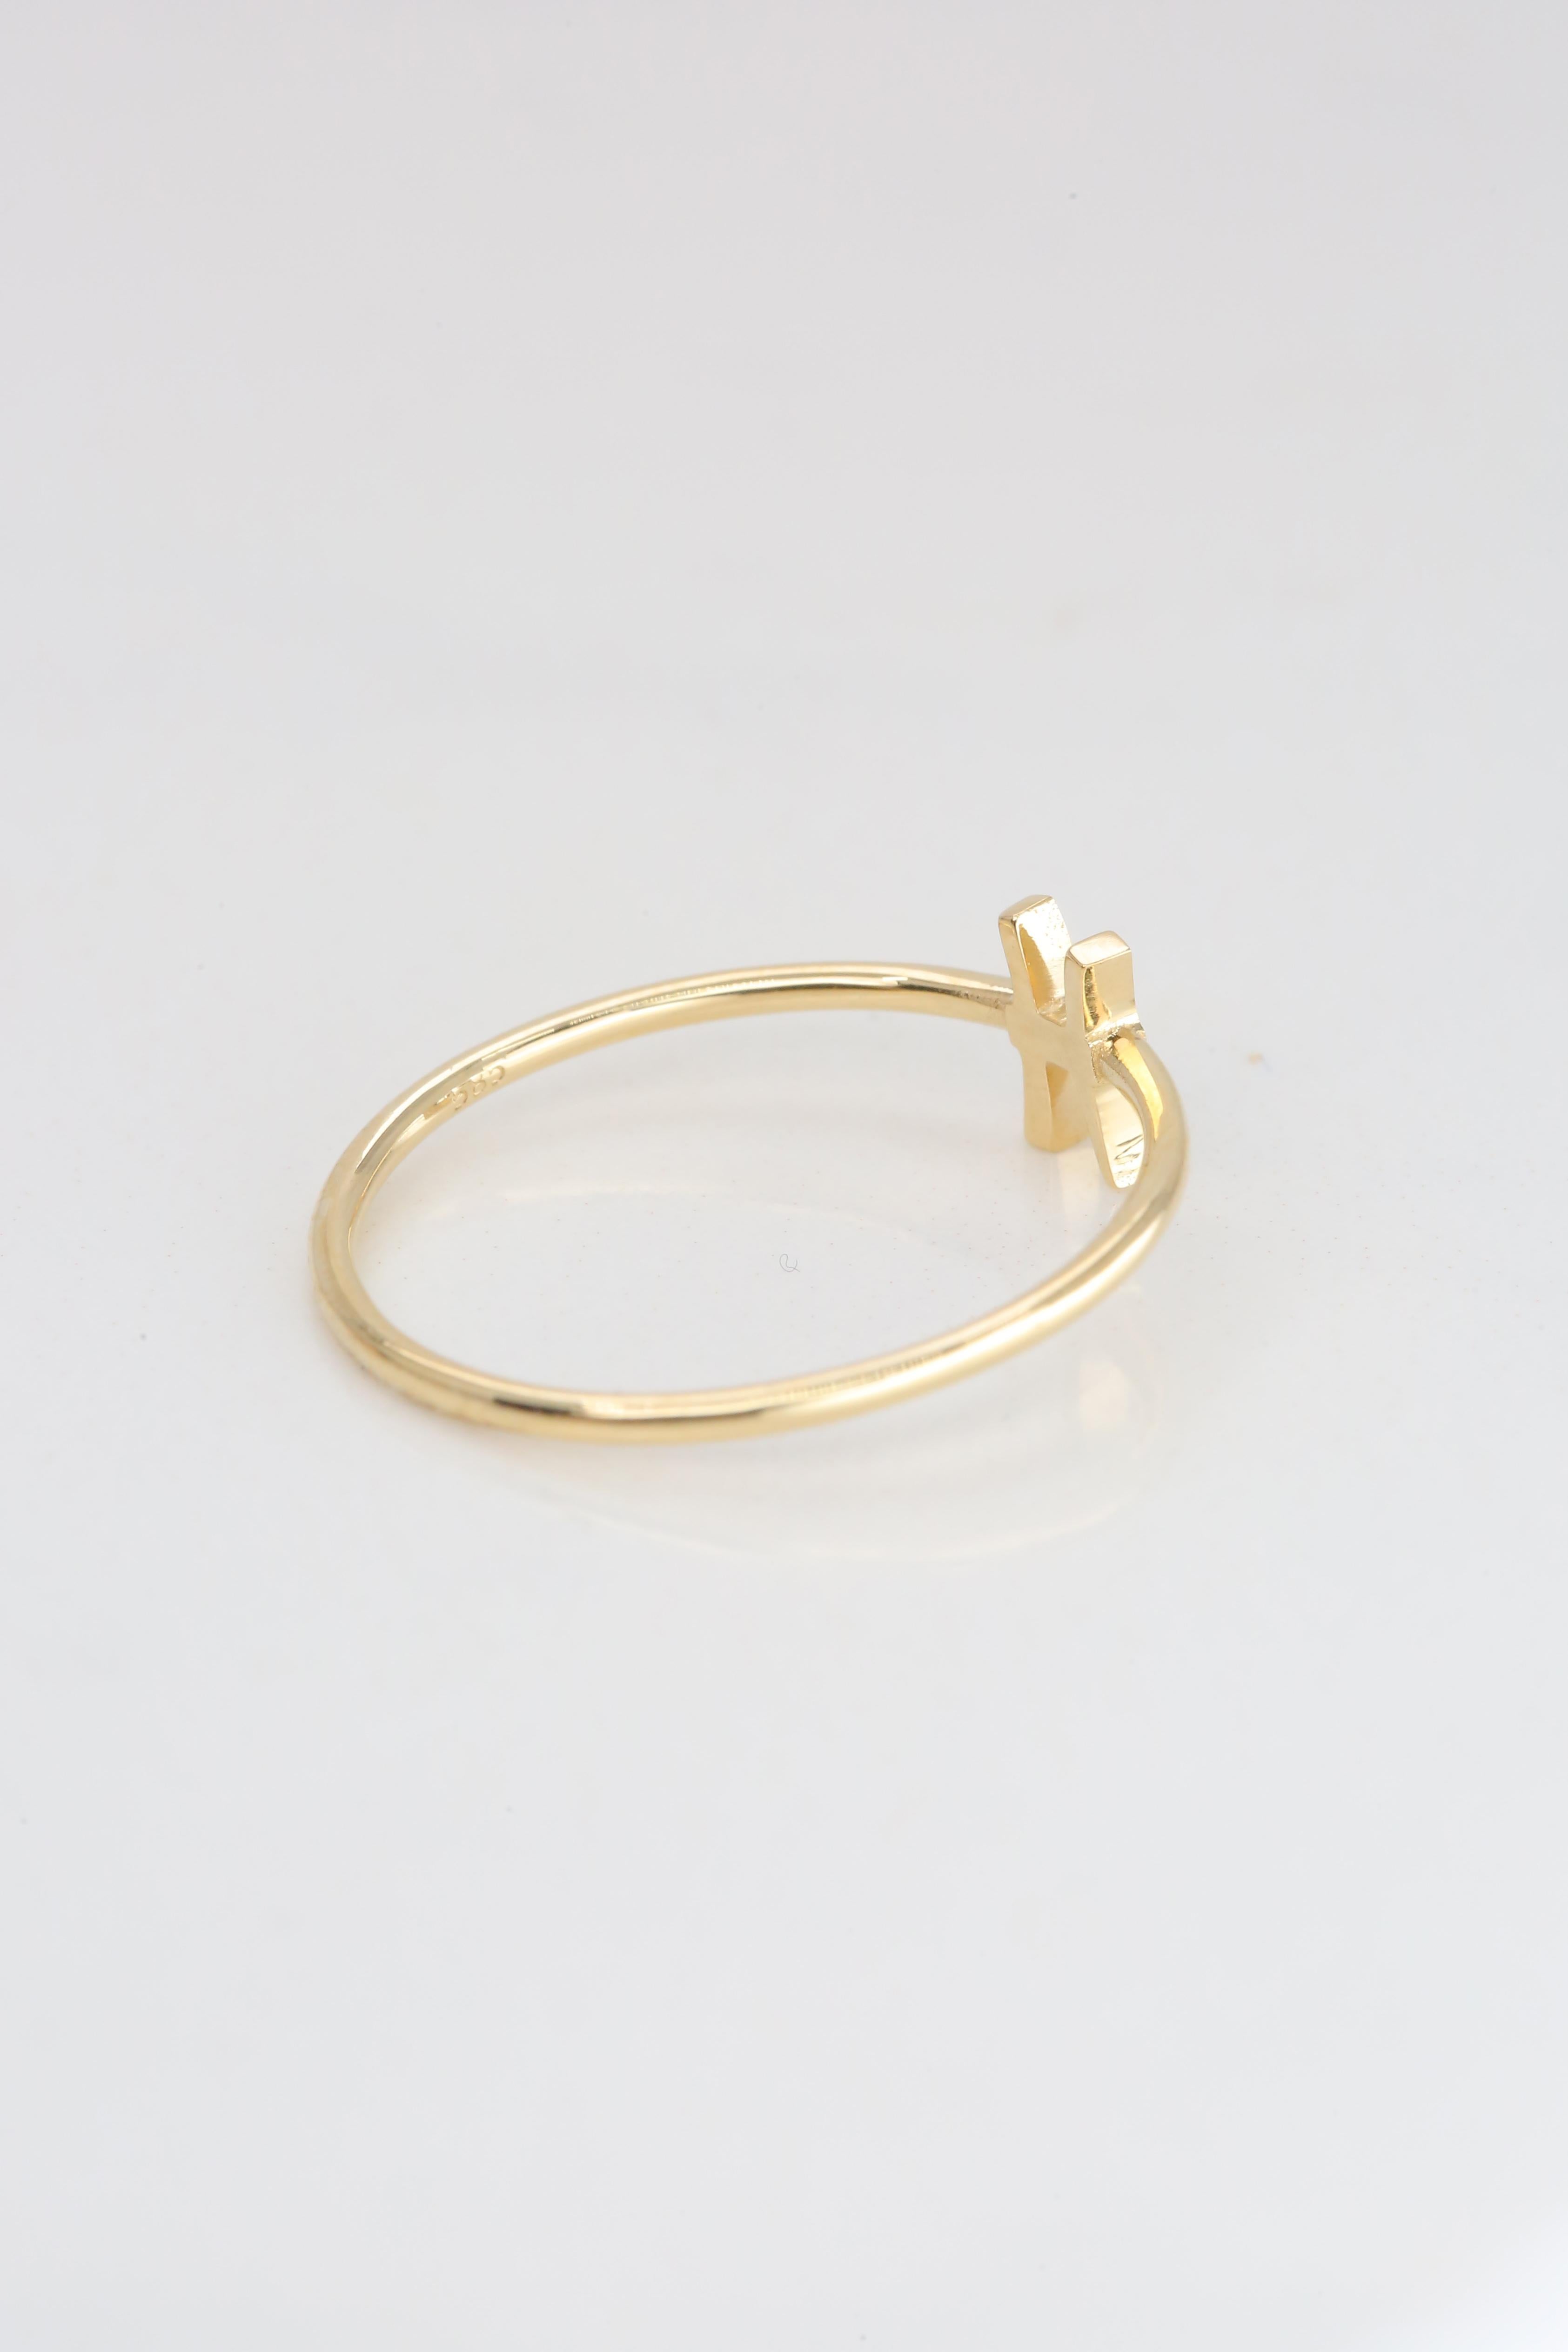 For Sale:  14K Gold Pisces Ring, Pisces Sign Gold Ring 7